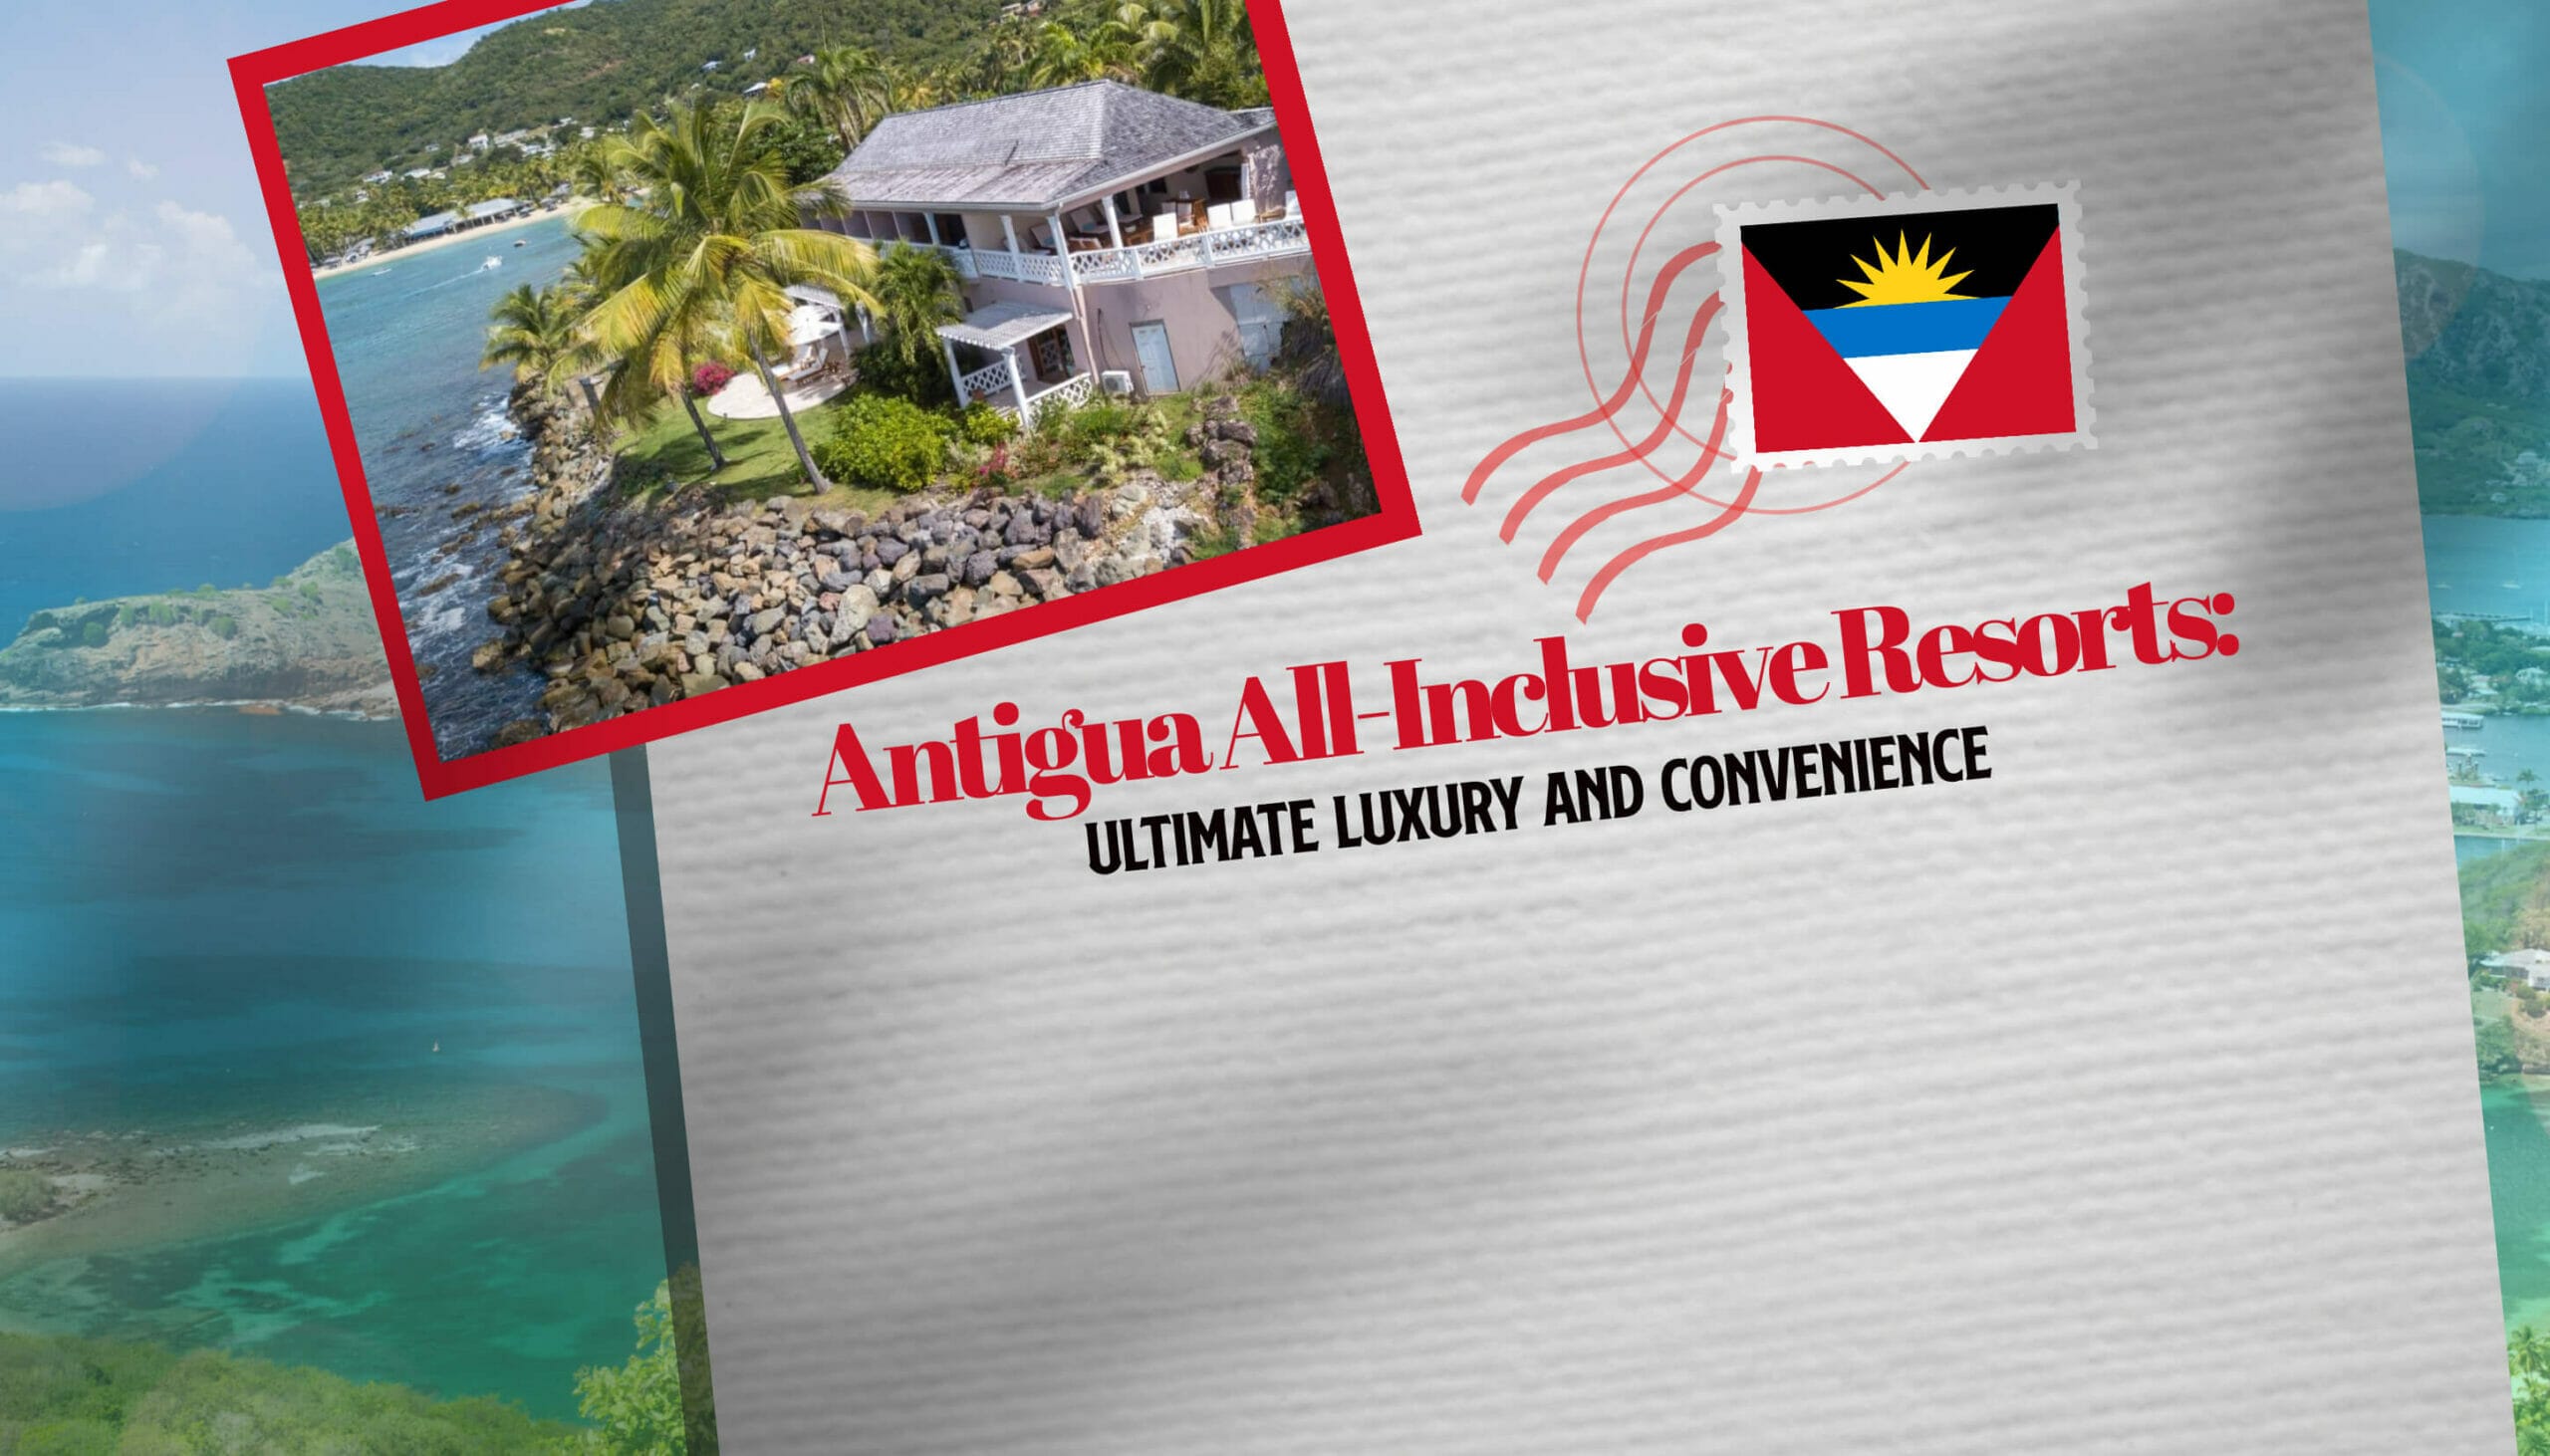 Antigua All-Inclusive Resorts Ultimate Luxury and Convenience